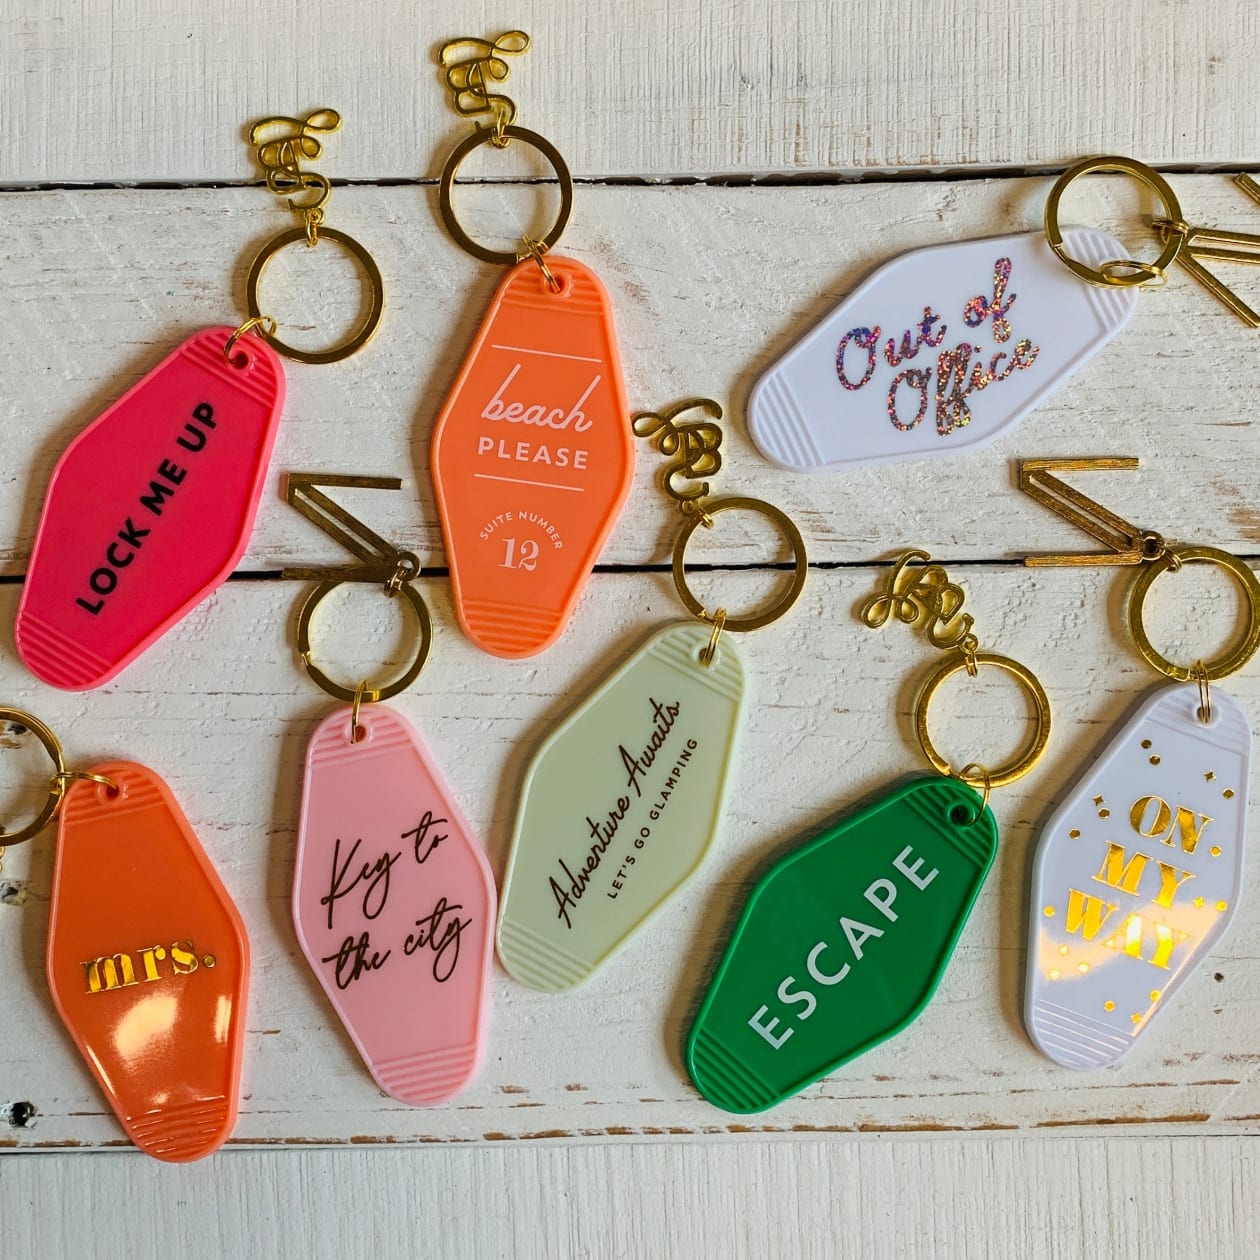 Beach Please Motel Style Keychain with Gold Hardware